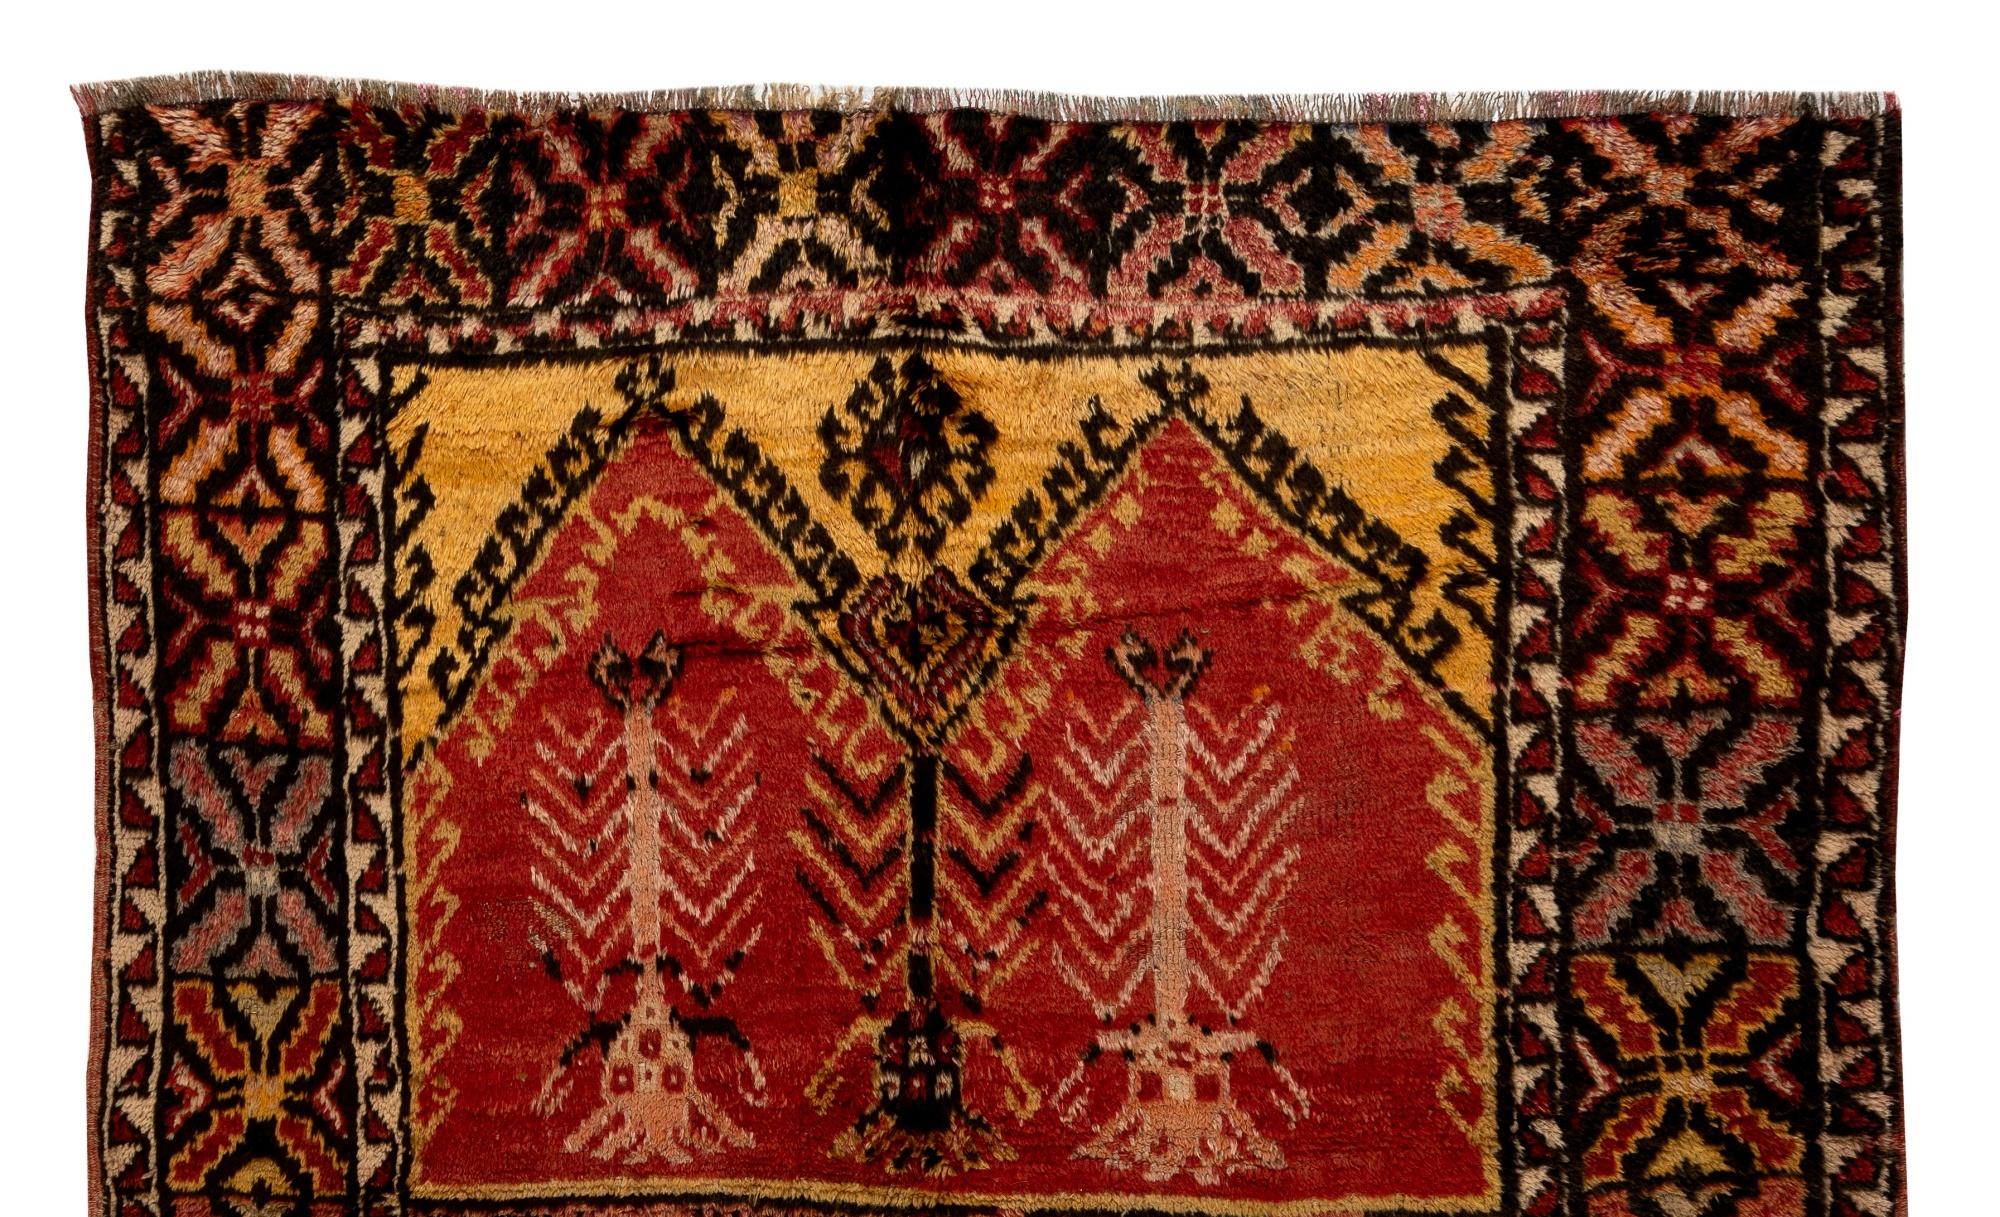 A vintage, one-of-a-kind, hand-knotted Tulu (Turkish word for thick-piled) rug from Konya in Central Anatolia, Turkey. These simple and somewhat small rugs with lustrous wool pile were made by nomads and villagers in Konya region of Central Anatolia